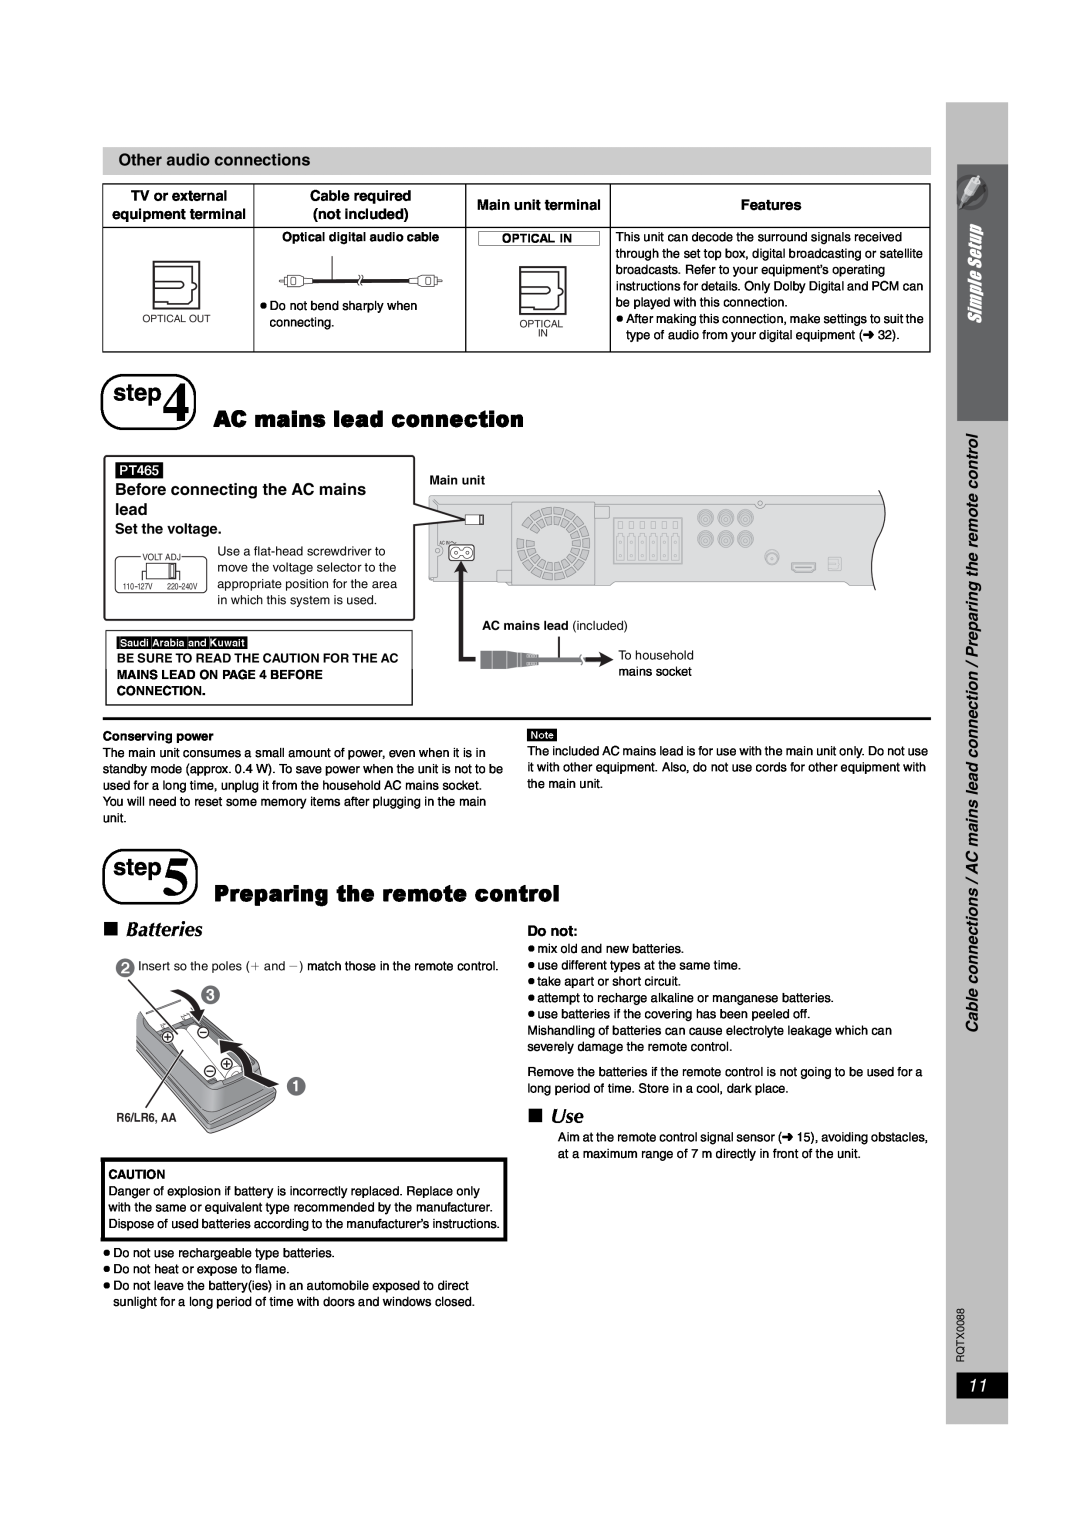 Panasonic SC-PT465 manual AC mains lead connection, Preparing the remote control, Batteries, Use, Simple Setup, Optical\In 